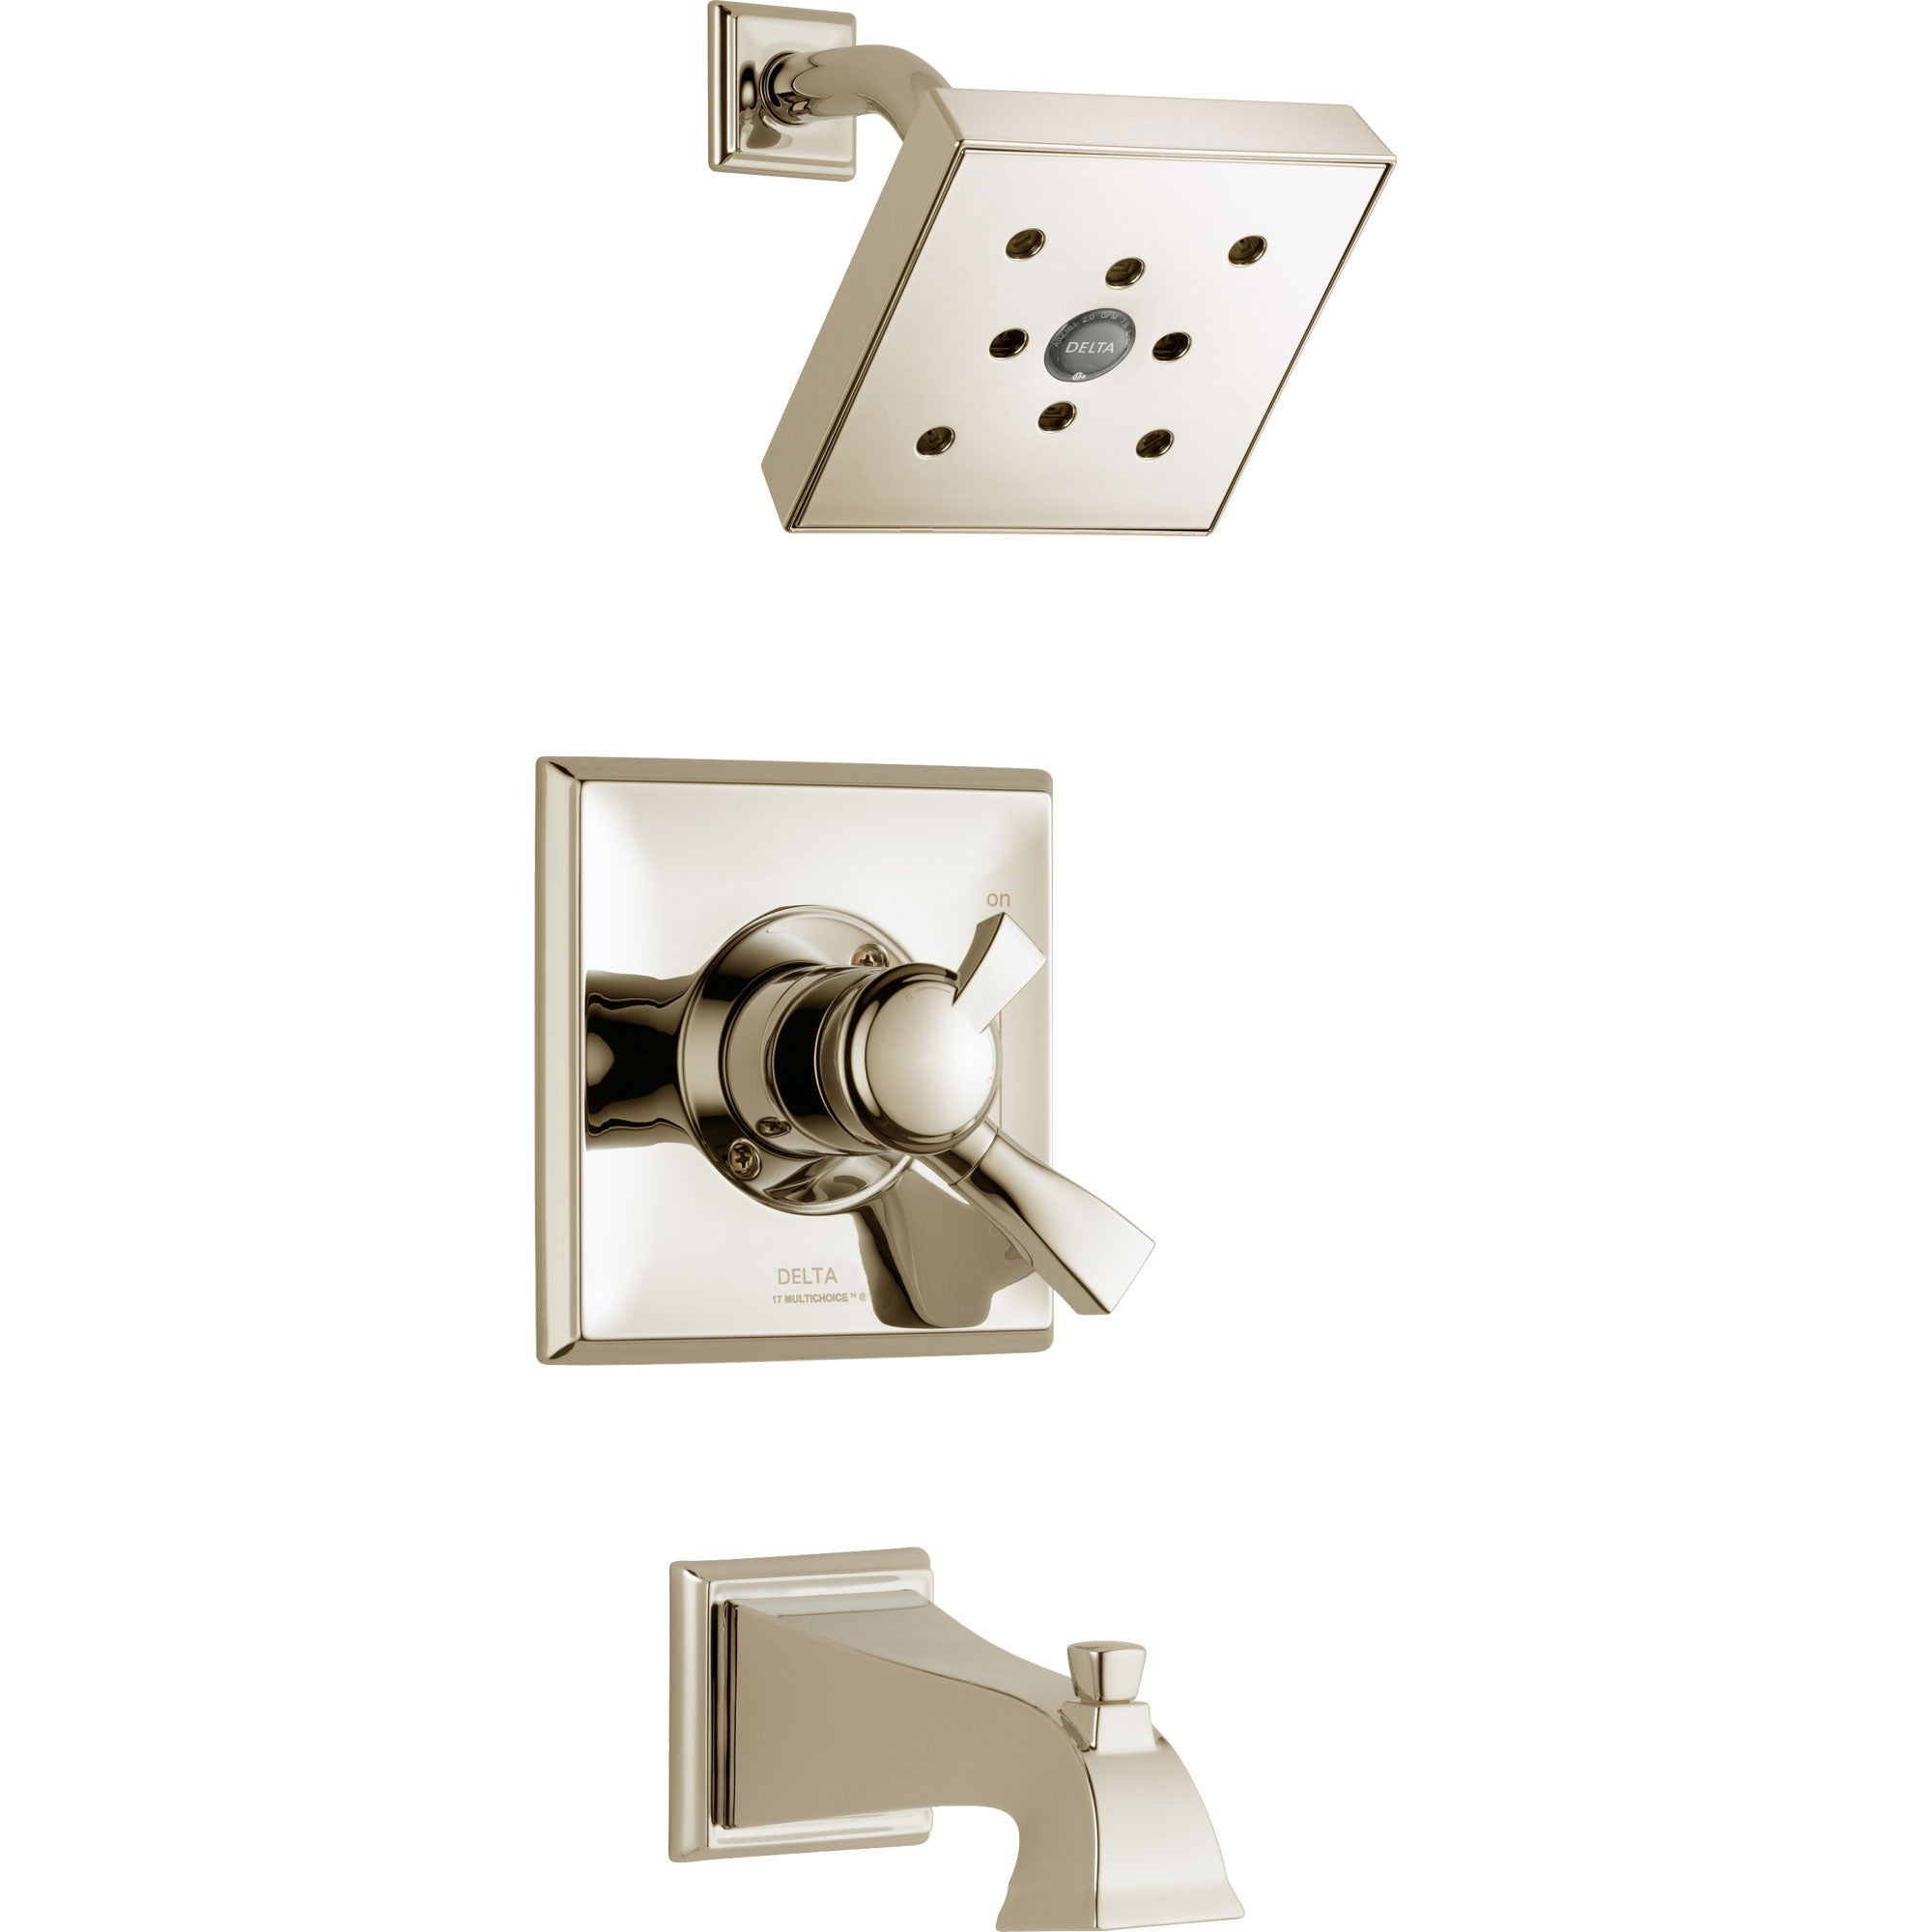 Delta Dryden Modern Polished Nickel Finish H2Okinetic Tub and Shower Faucet Combination with Dual Temperature and Pressure Control INCLUDES Rough-in Valve D1126V